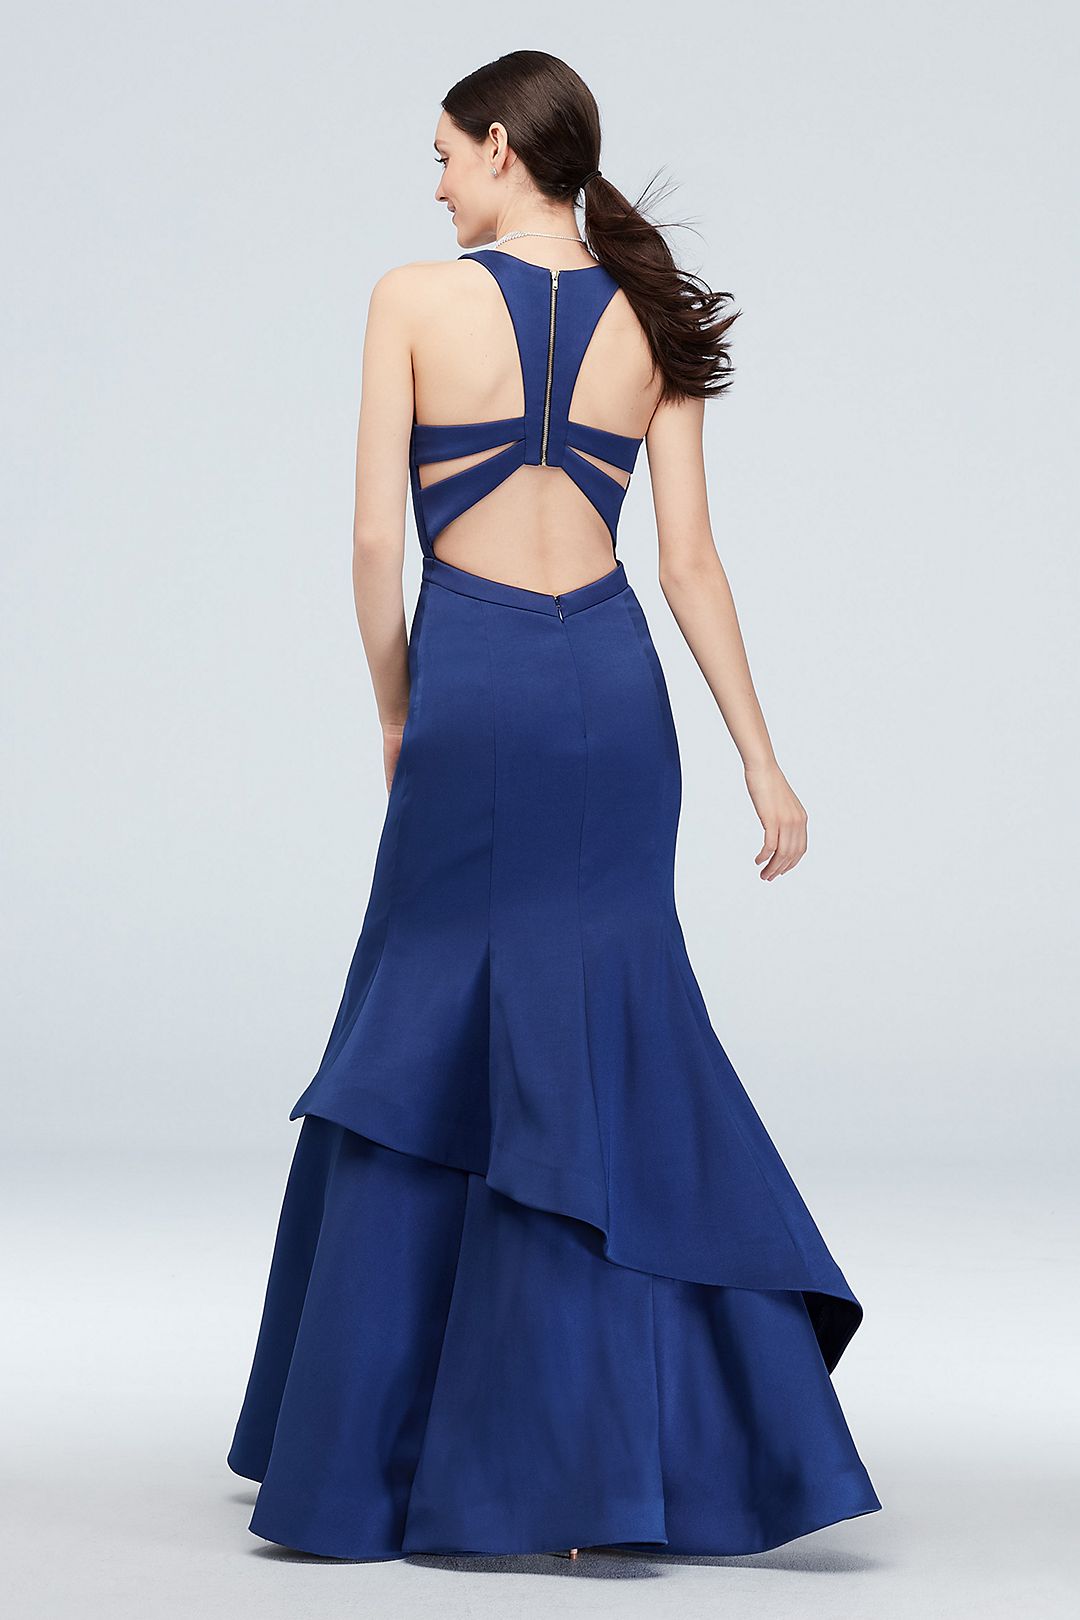 Cutout Racerback Mermaid Gown with Layered Skirt Image 2